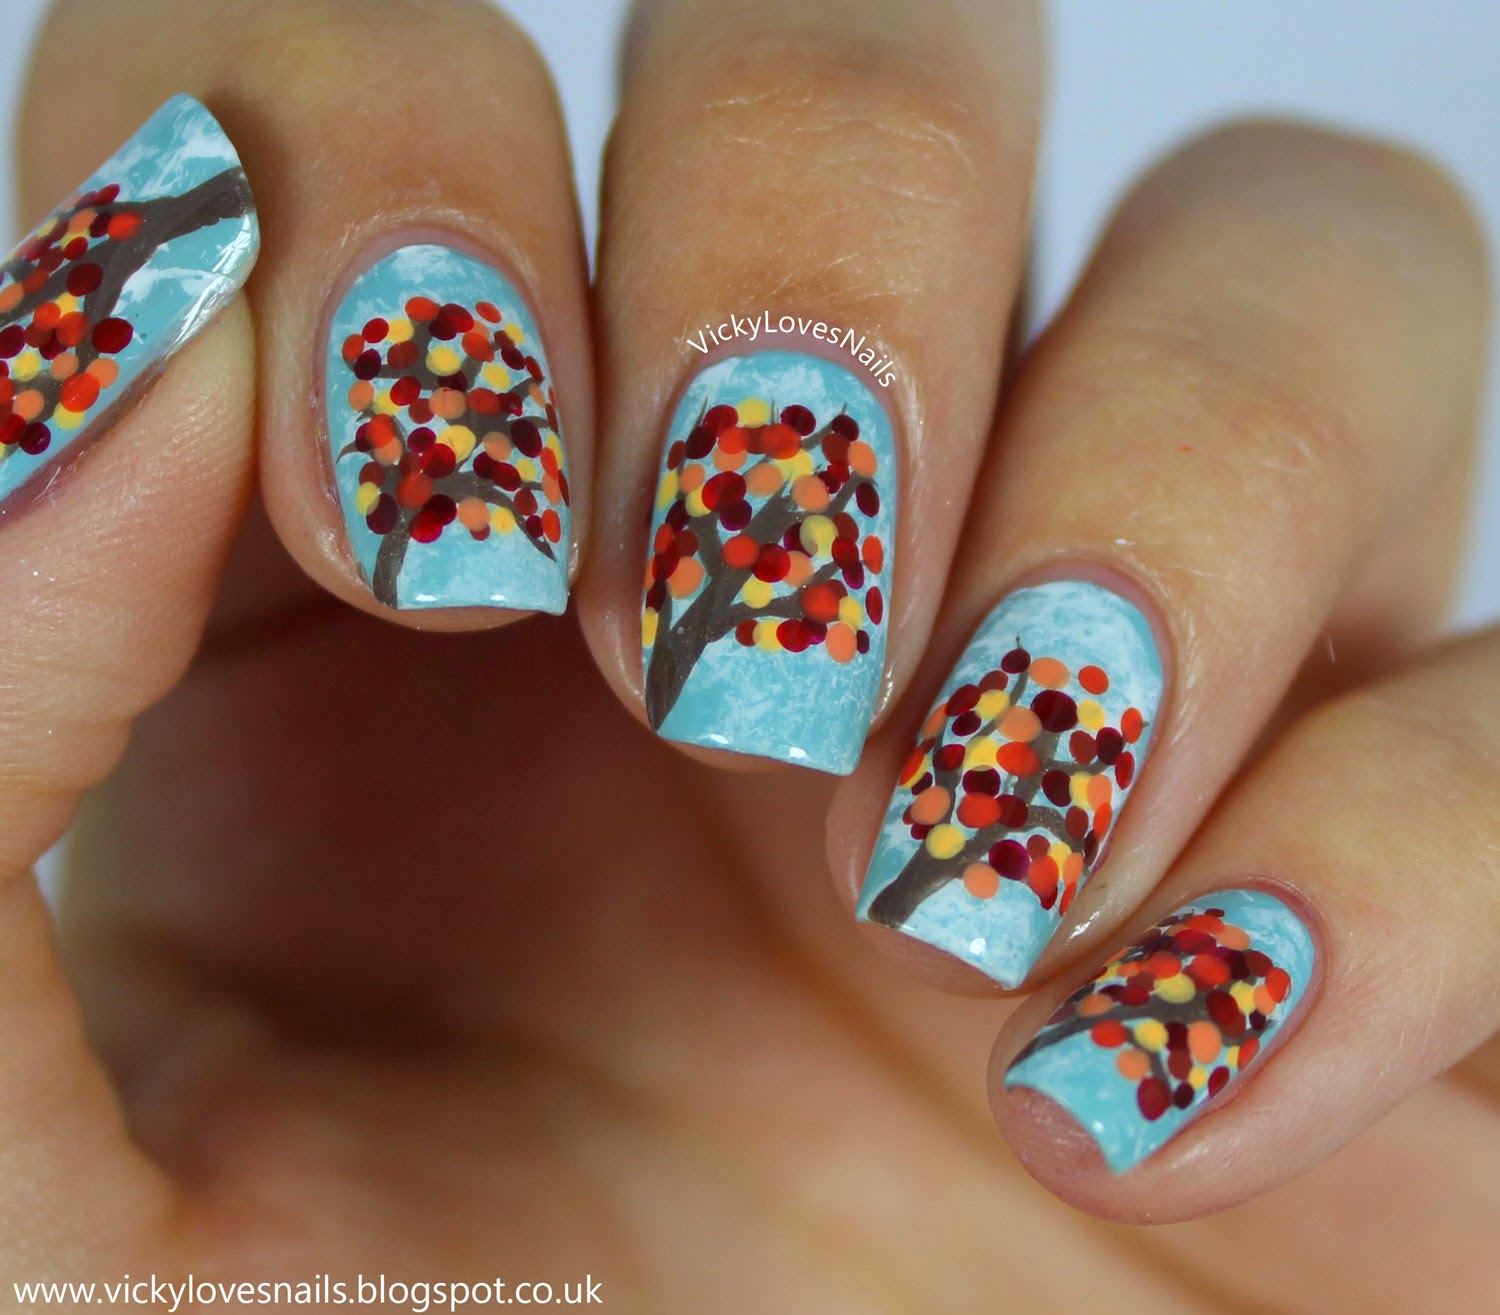 Vicky Loves Nails!: Fingerfood's Theme Buffet - Autumn